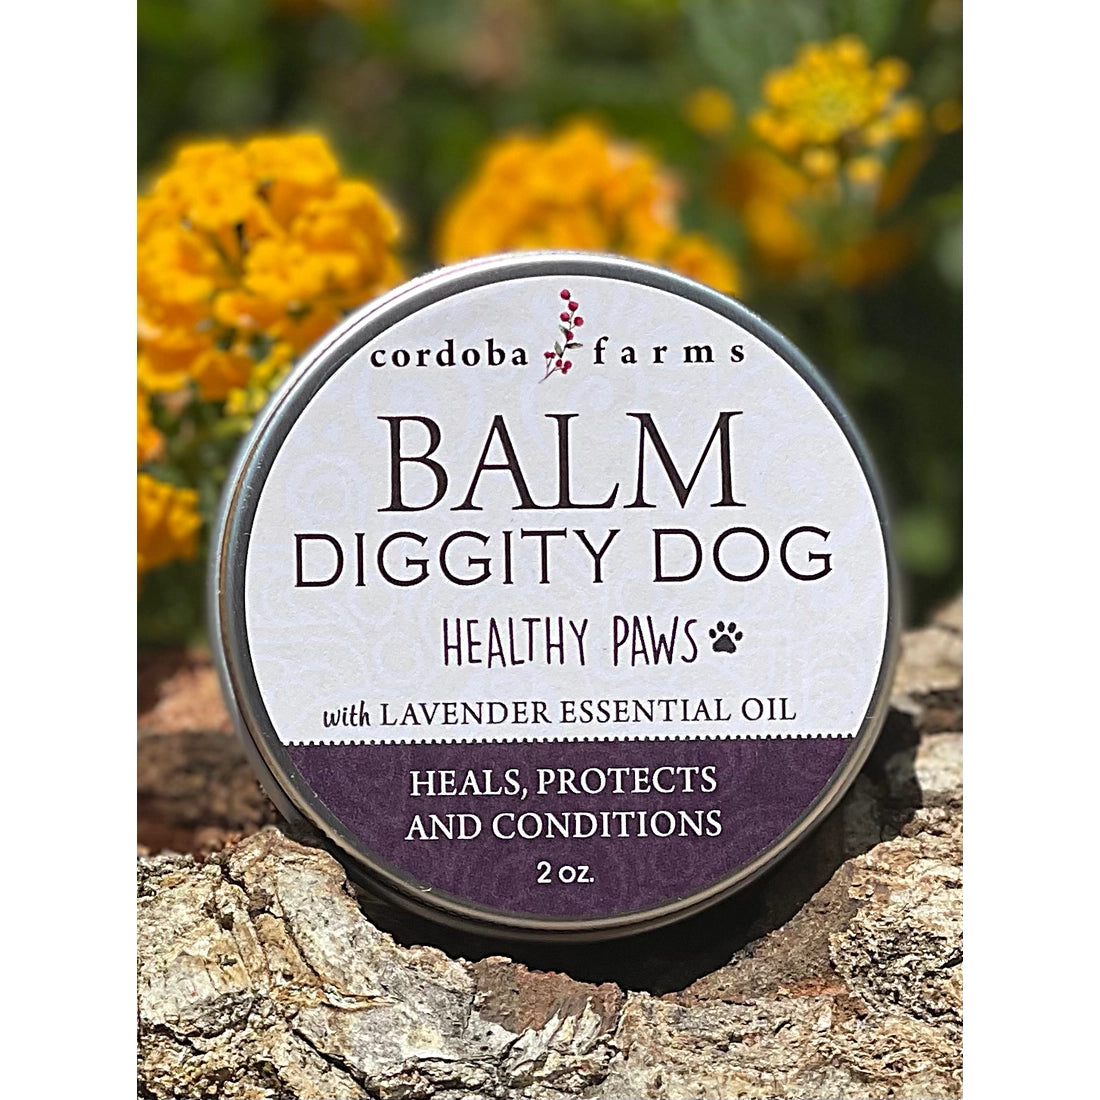 paw balm made with lavender essential oil